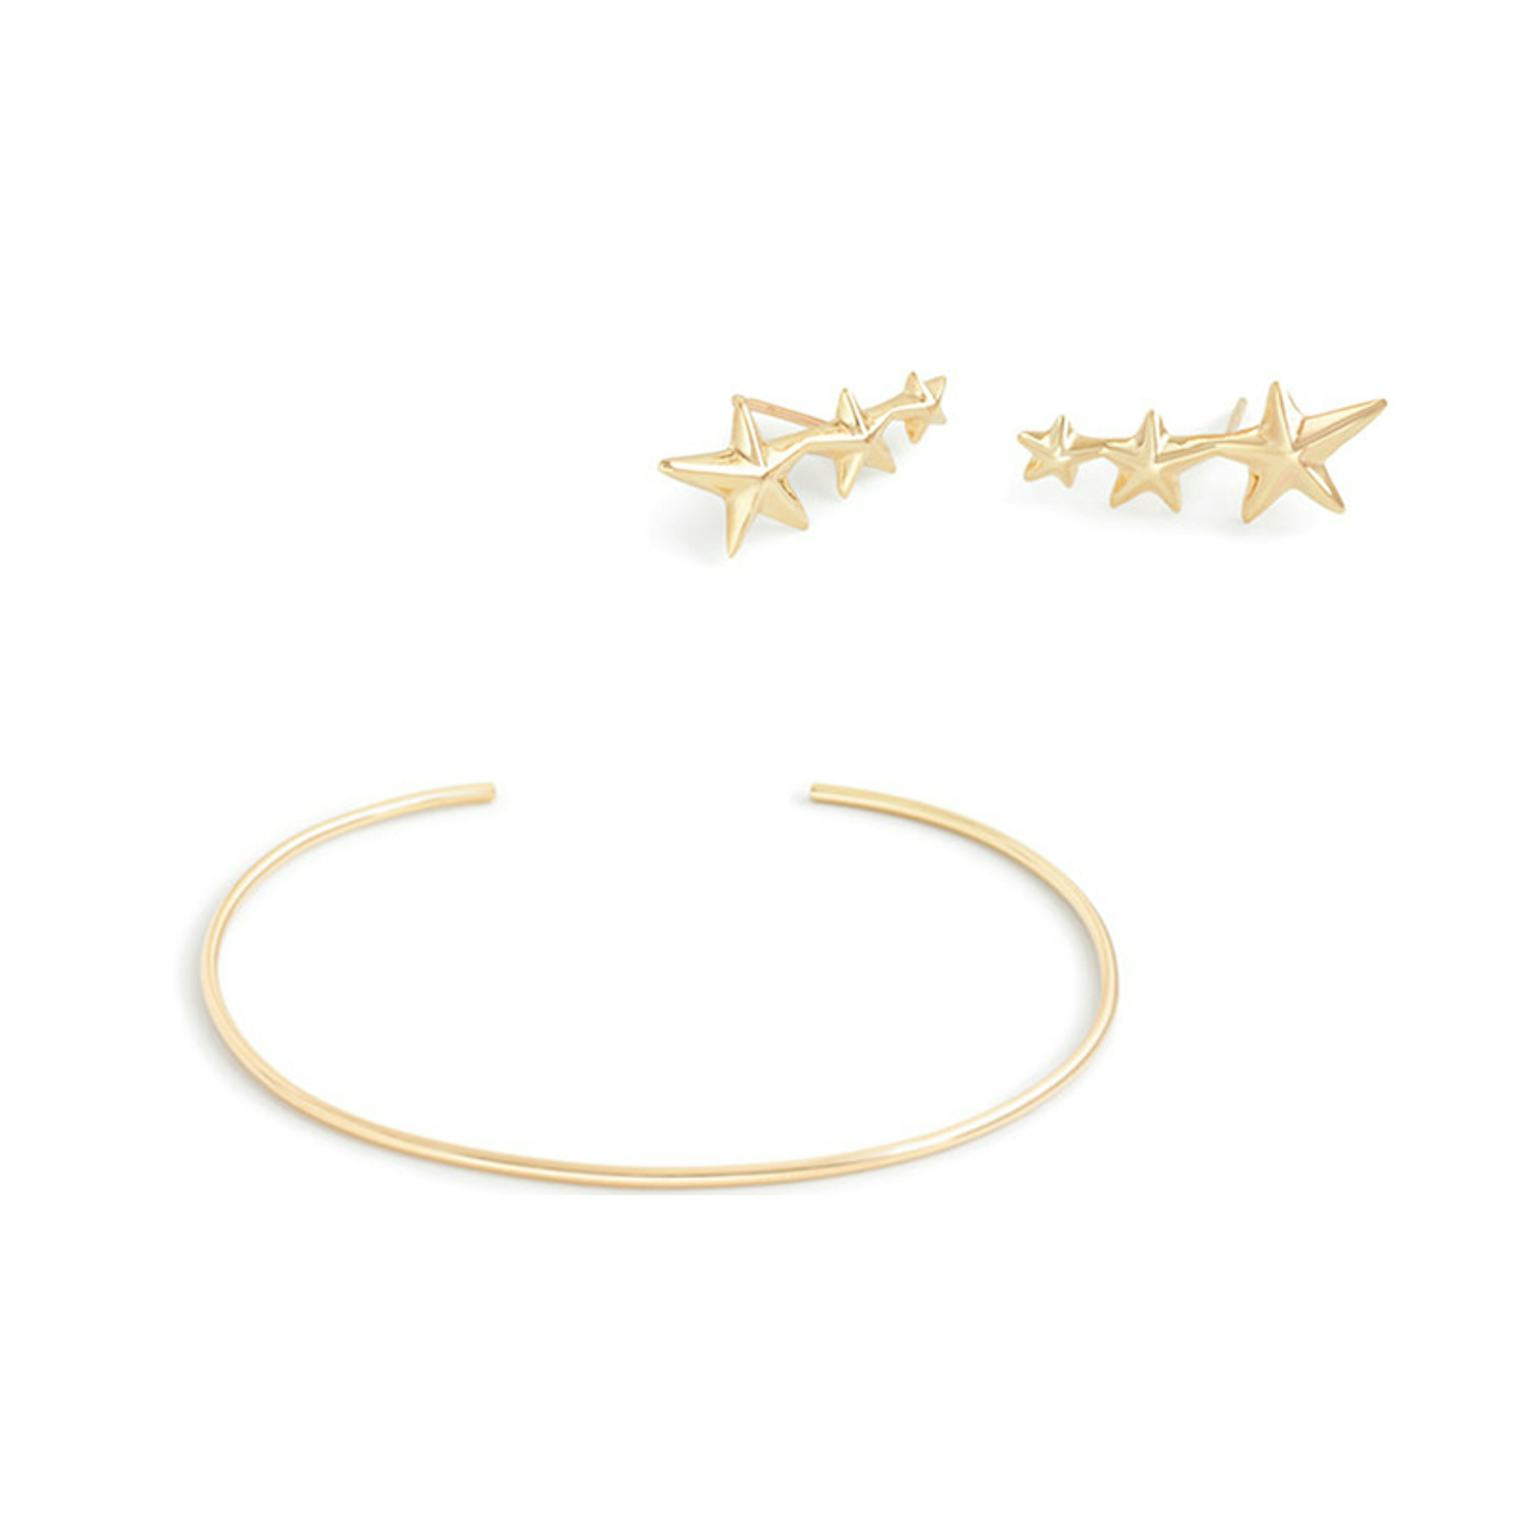 The Perfect Everyday Jewelry